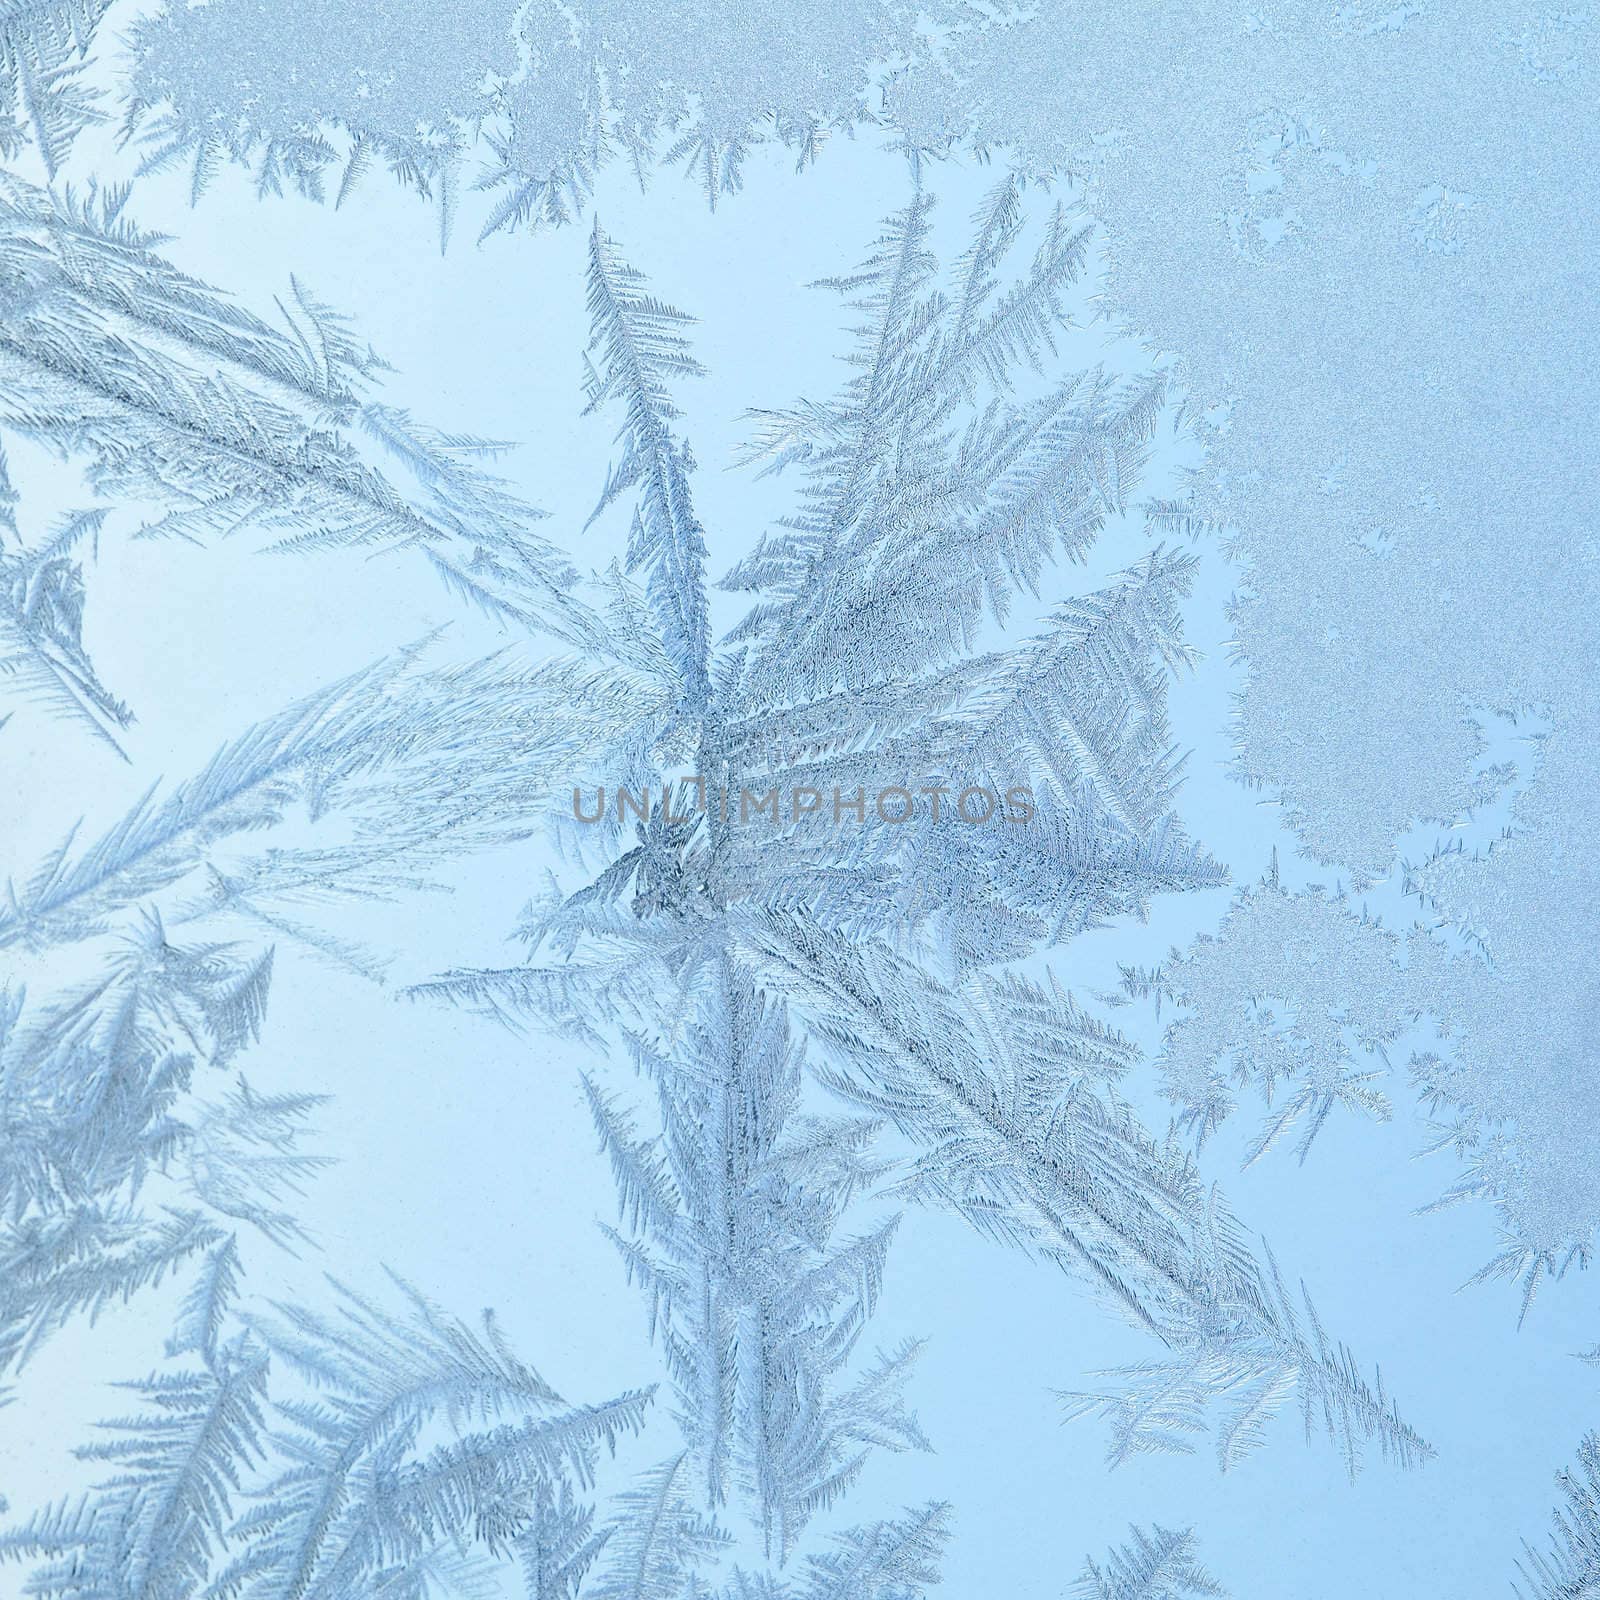 Frozen window with glass pattern by ecobo